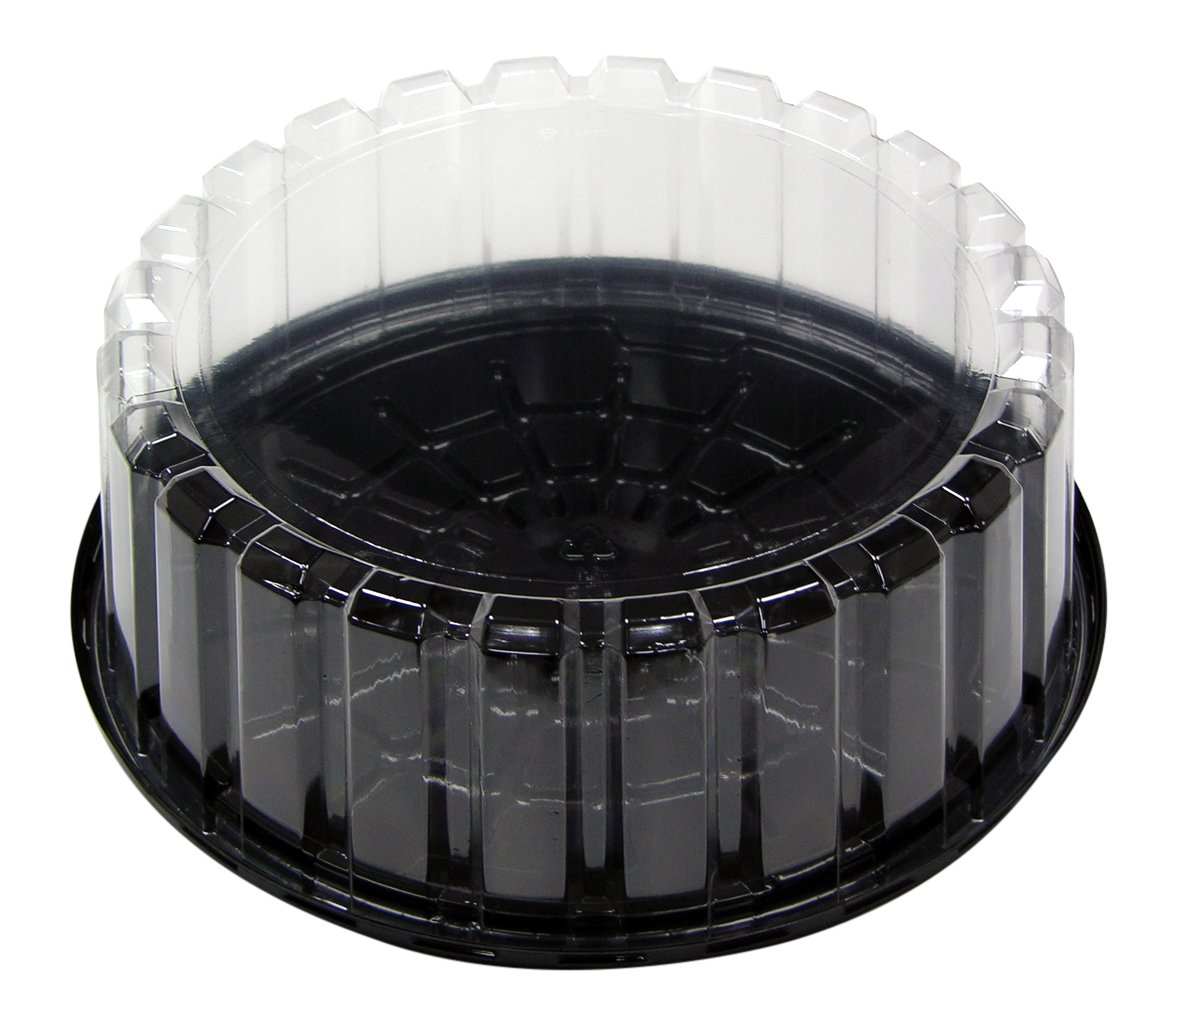 [Yeh899020000] 3.375 Shallow 
Cake Container W/ Black Base 
for 8-9&quot; Cake
(90)